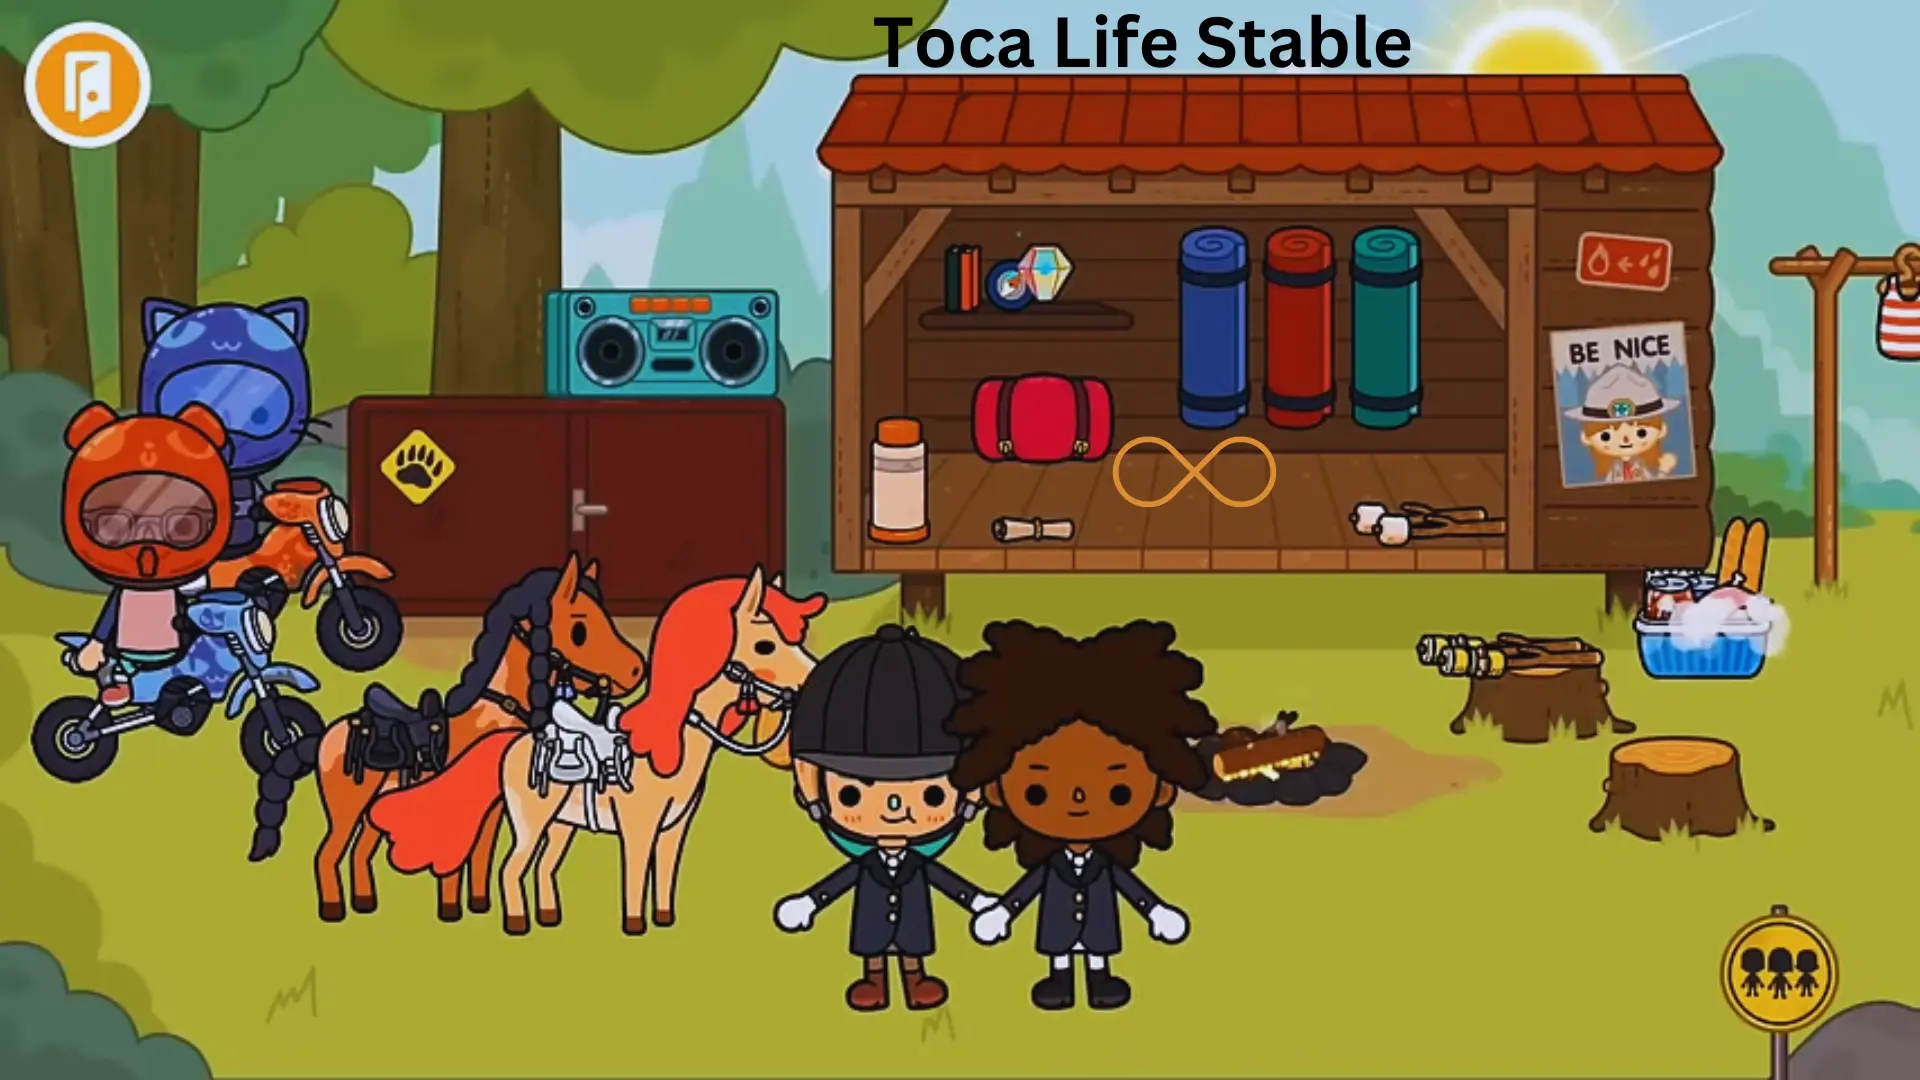 Care for horses and explore in Toca Life Stable